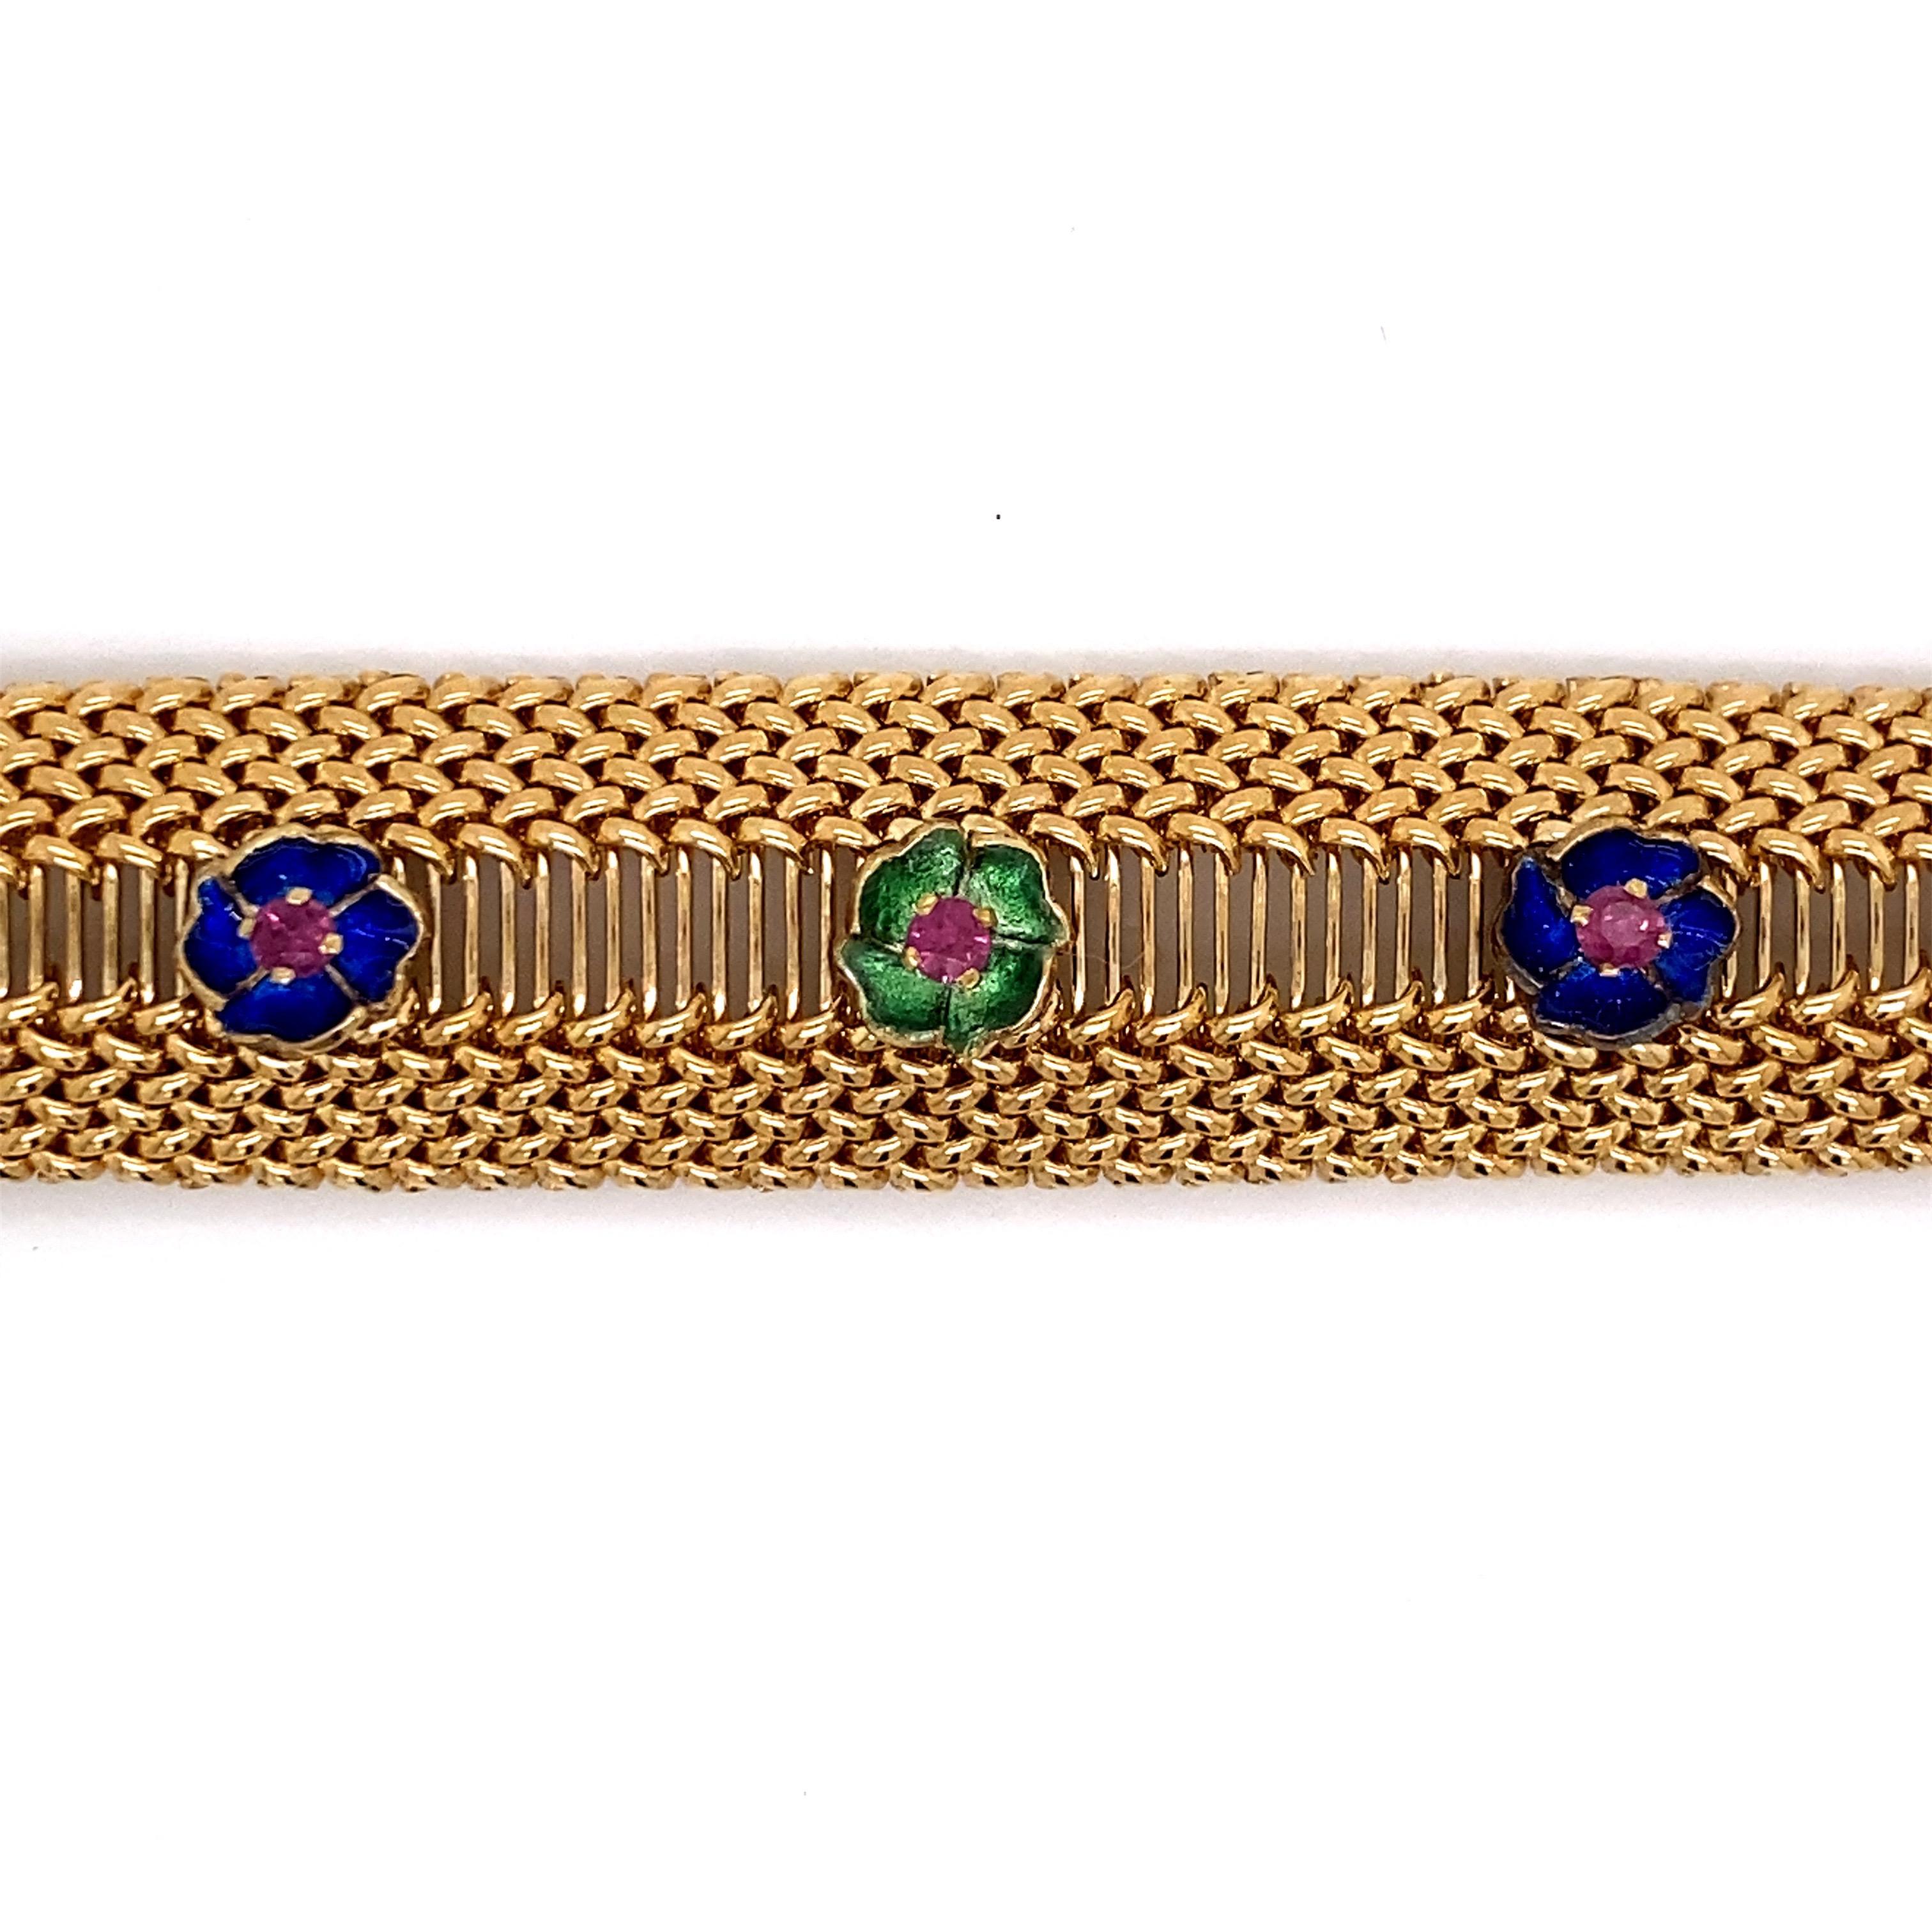 Vintage 1960s 14 Karat Yellow Gold Mesh Bracelet with Enamel Flowers and Rubies In Good Condition For Sale In Boston, MA